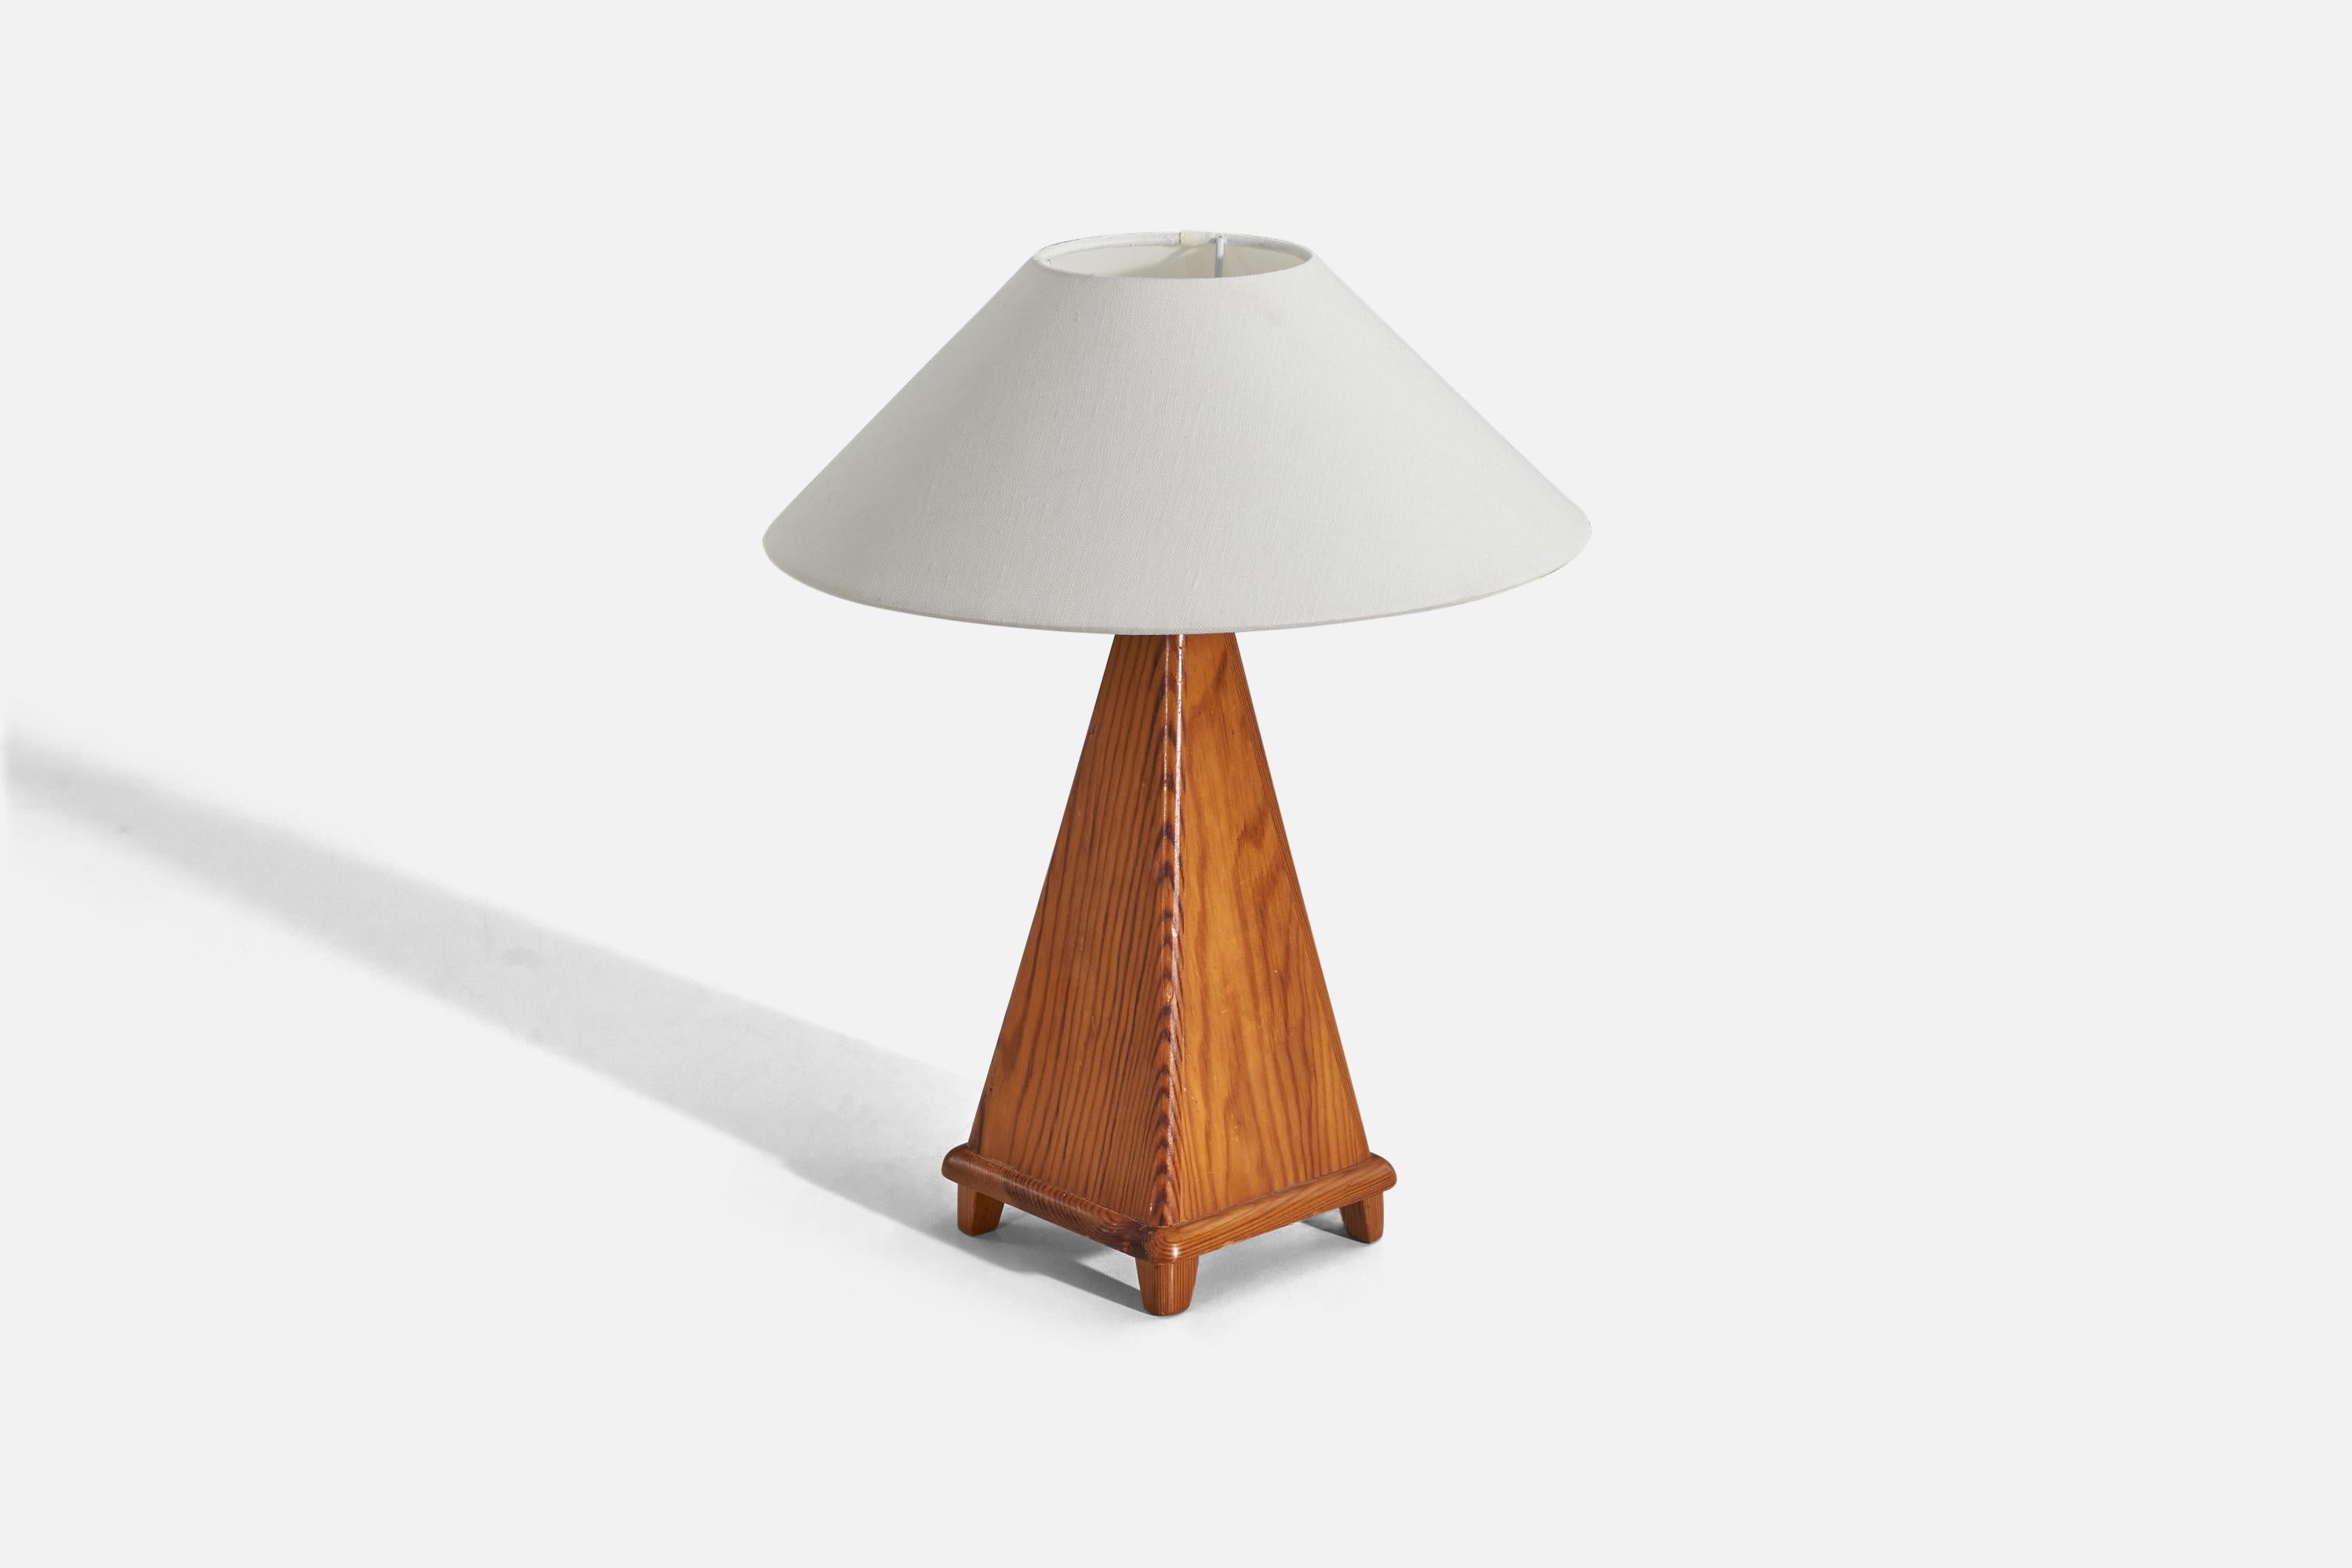 A pine table lamp designed and produced in Sweden, c. 1950s. 

Sold with fabric lampshade. 
Dimensions of lamp (inches) : 12.75 x 5 x 5 (height x width x depth).
Dimensions of shade (inches) : 3.91 x 11.75 x 5.5 (top diameter x bottom diameter x